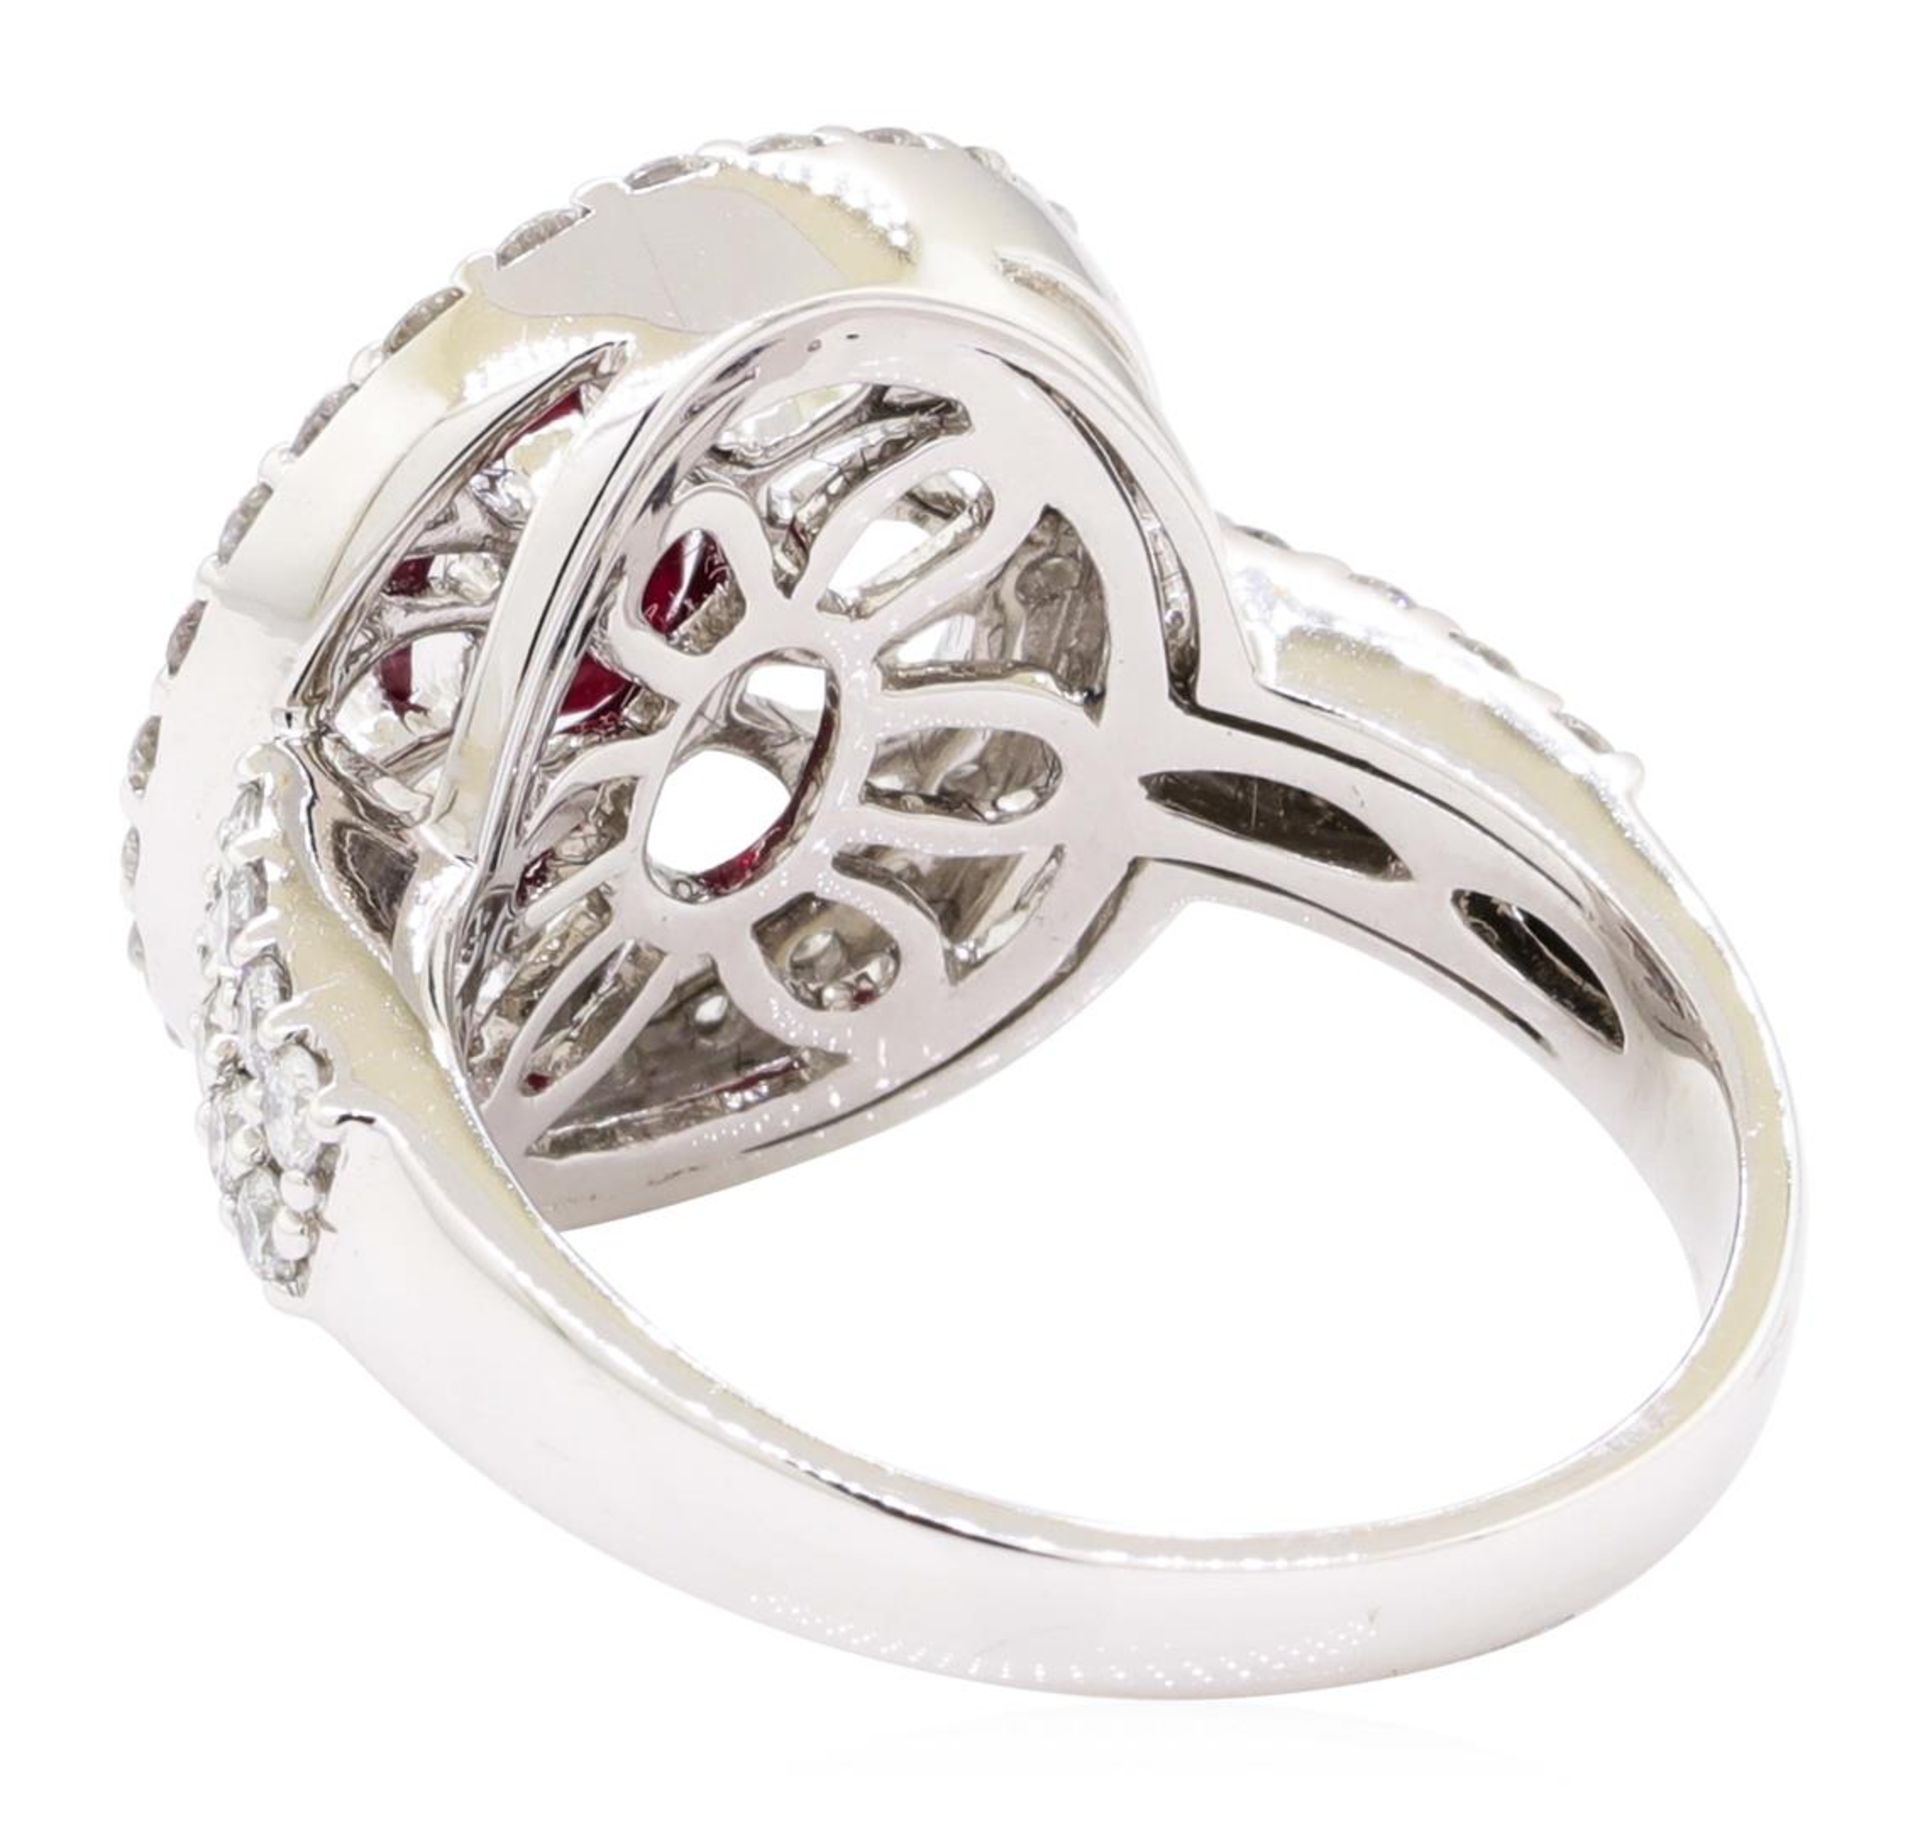 1.78 ctw Oval Mixed Ruby And Round Brilliant Cut Diamond Ring - 14KT White Gold - Image 3 of 5